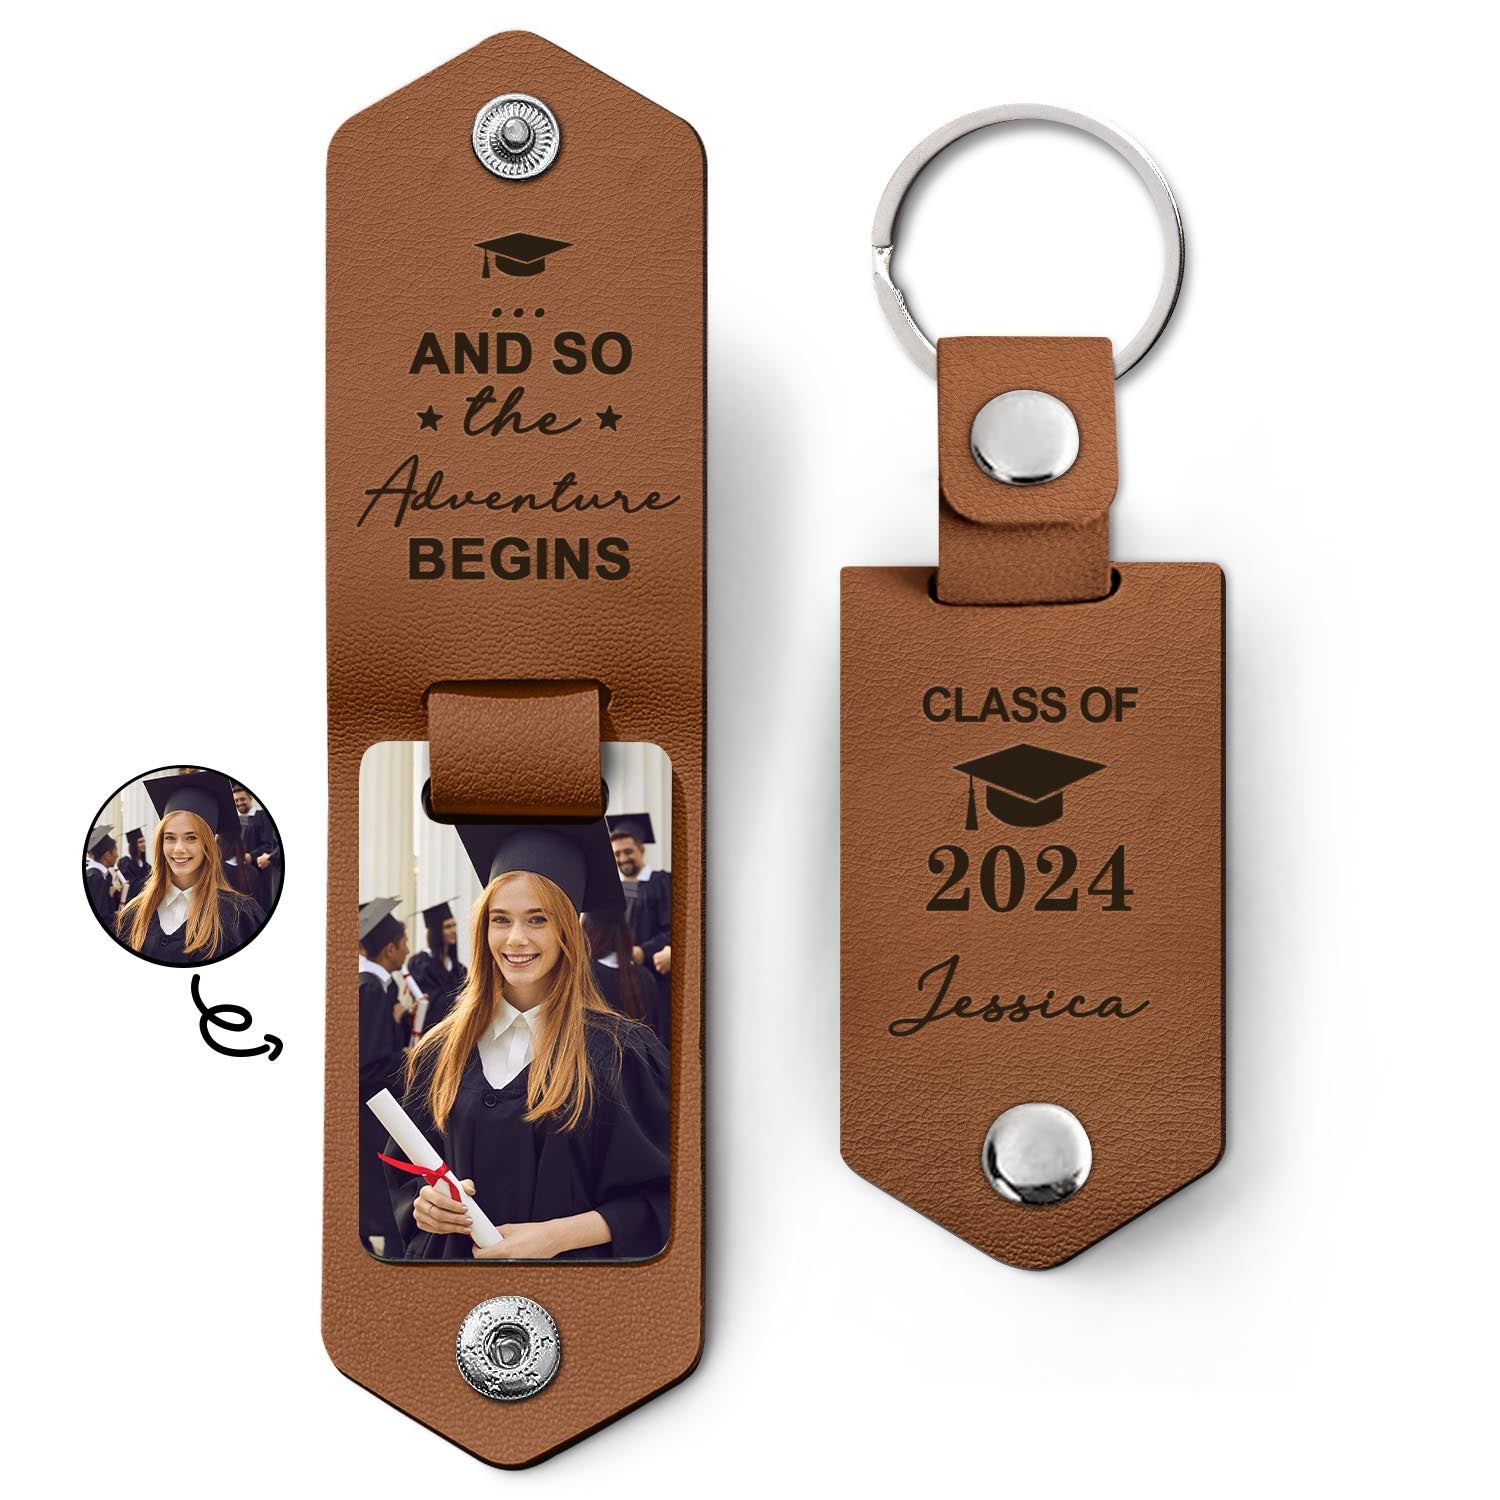 Custom Photo And So The Adventure Begins - Graduation Gift - Personalized Leather Photo Keychain